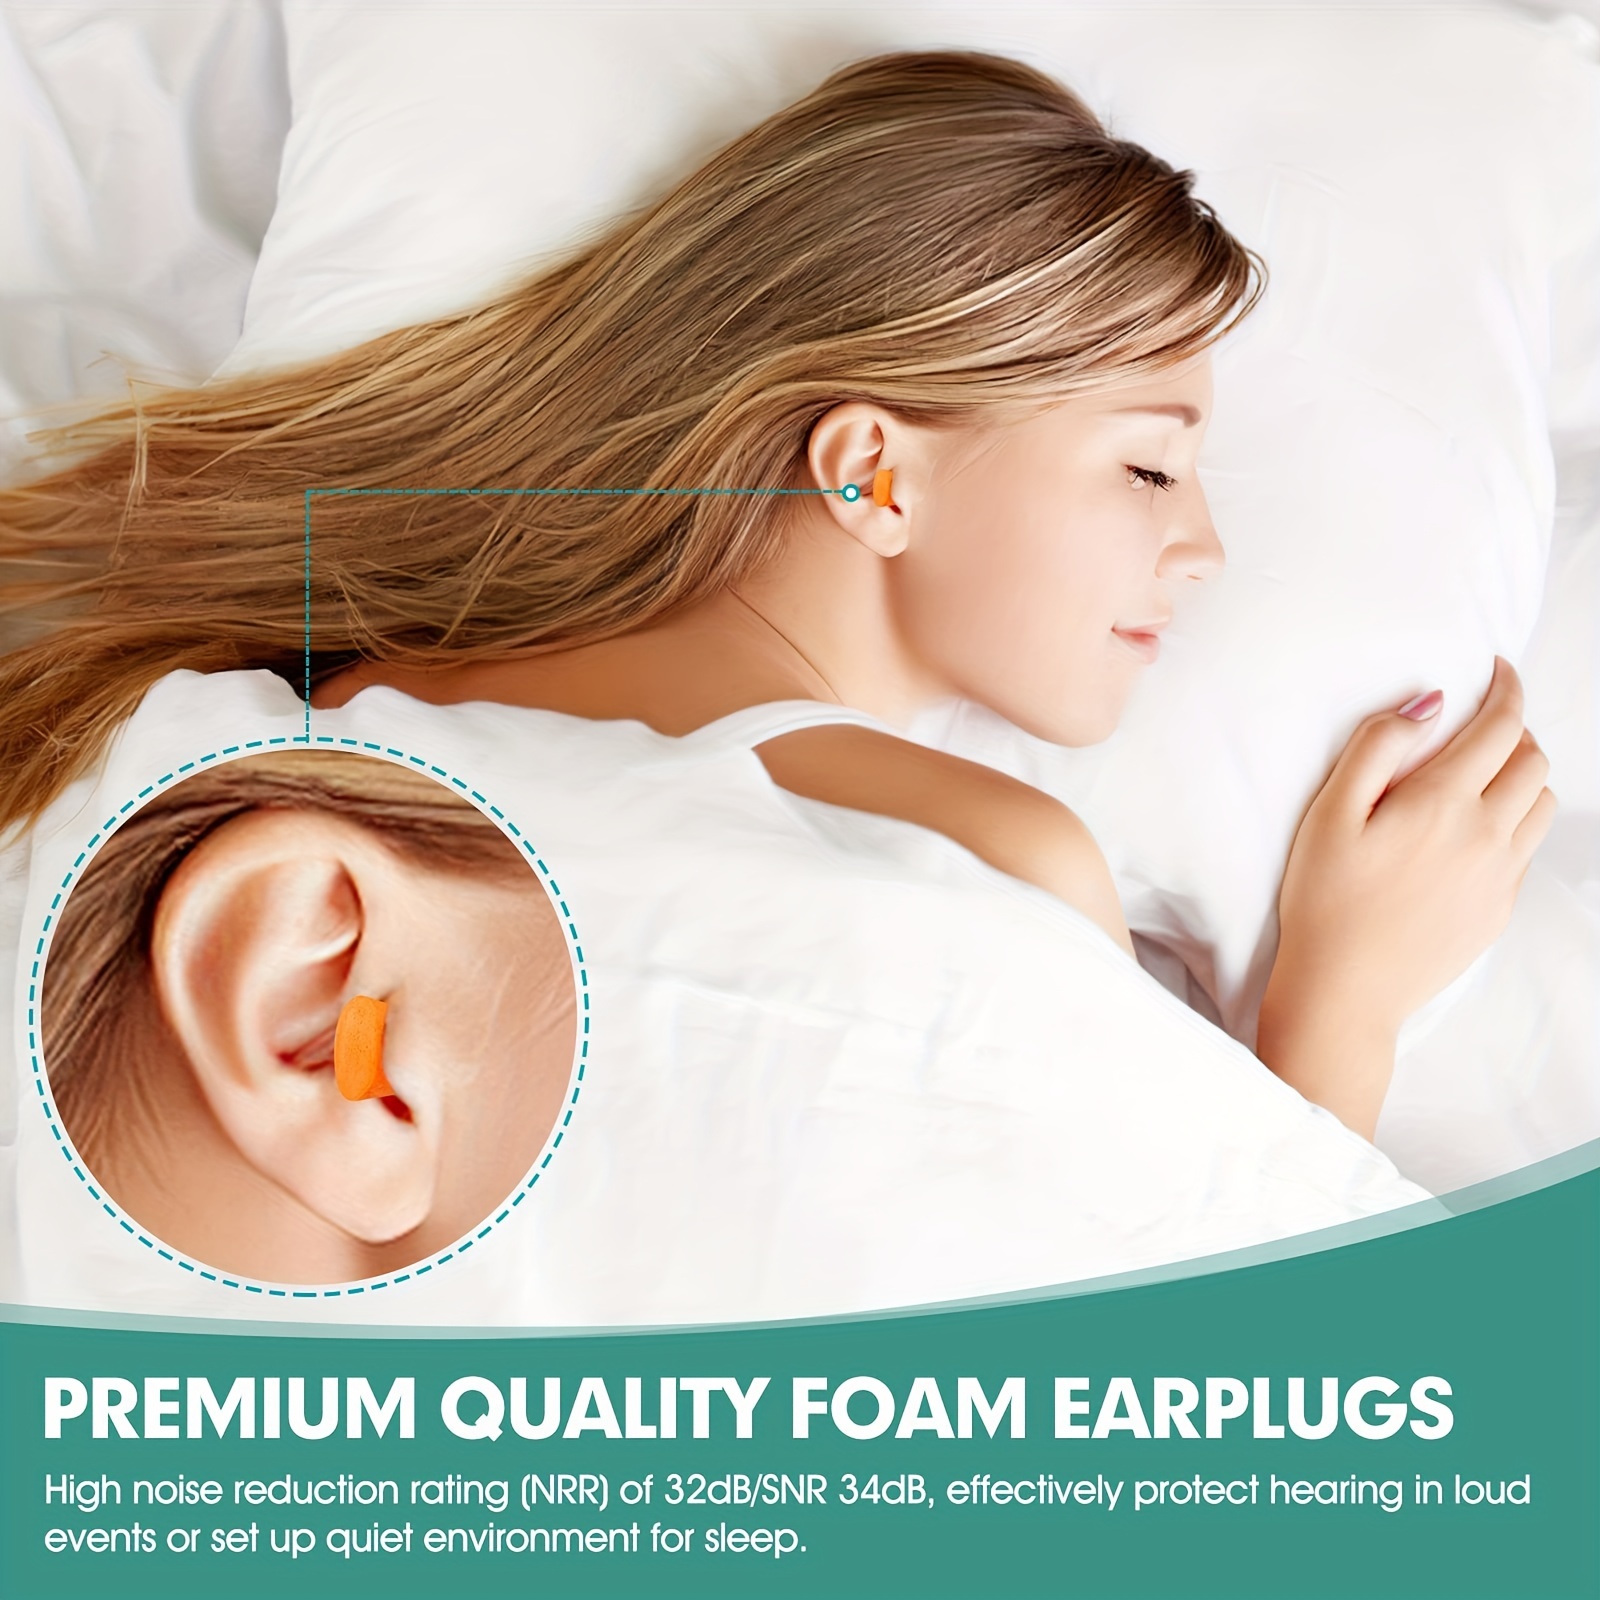  Ear Plugs for Sleeping - Vegpoet Reusable Moldable Silicone  Earplugs Noise Cancelling Reduction for Concerts, Swimming, Shooting,  Snoring, Airplane, Musicians, Motorcycle, 12 Pack : Health & Household